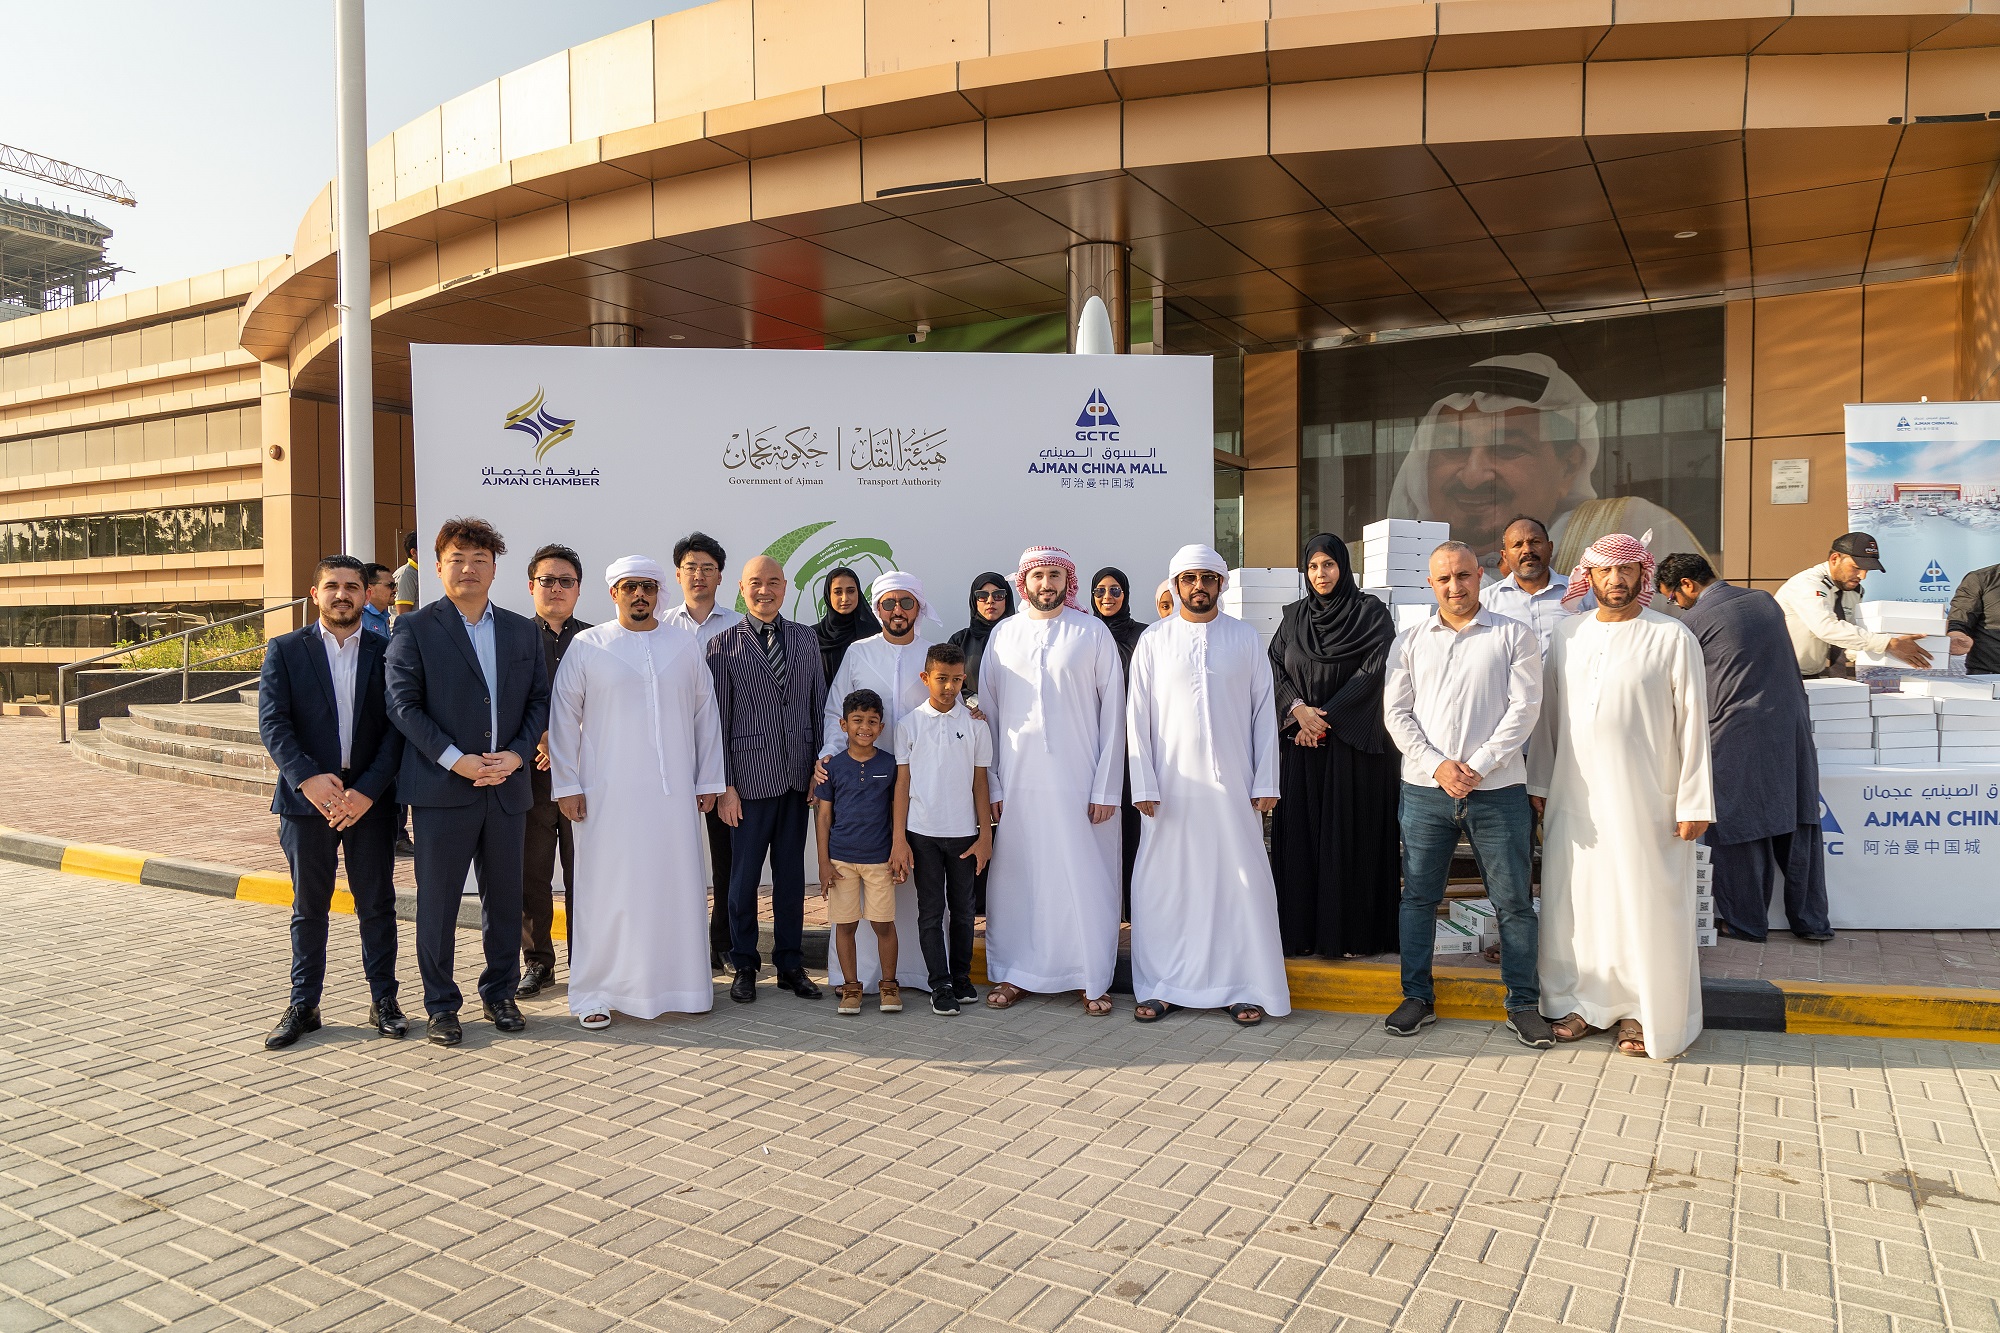 "Distributing Iftar Meals" initiative in cooperation with the Ajman China Mall